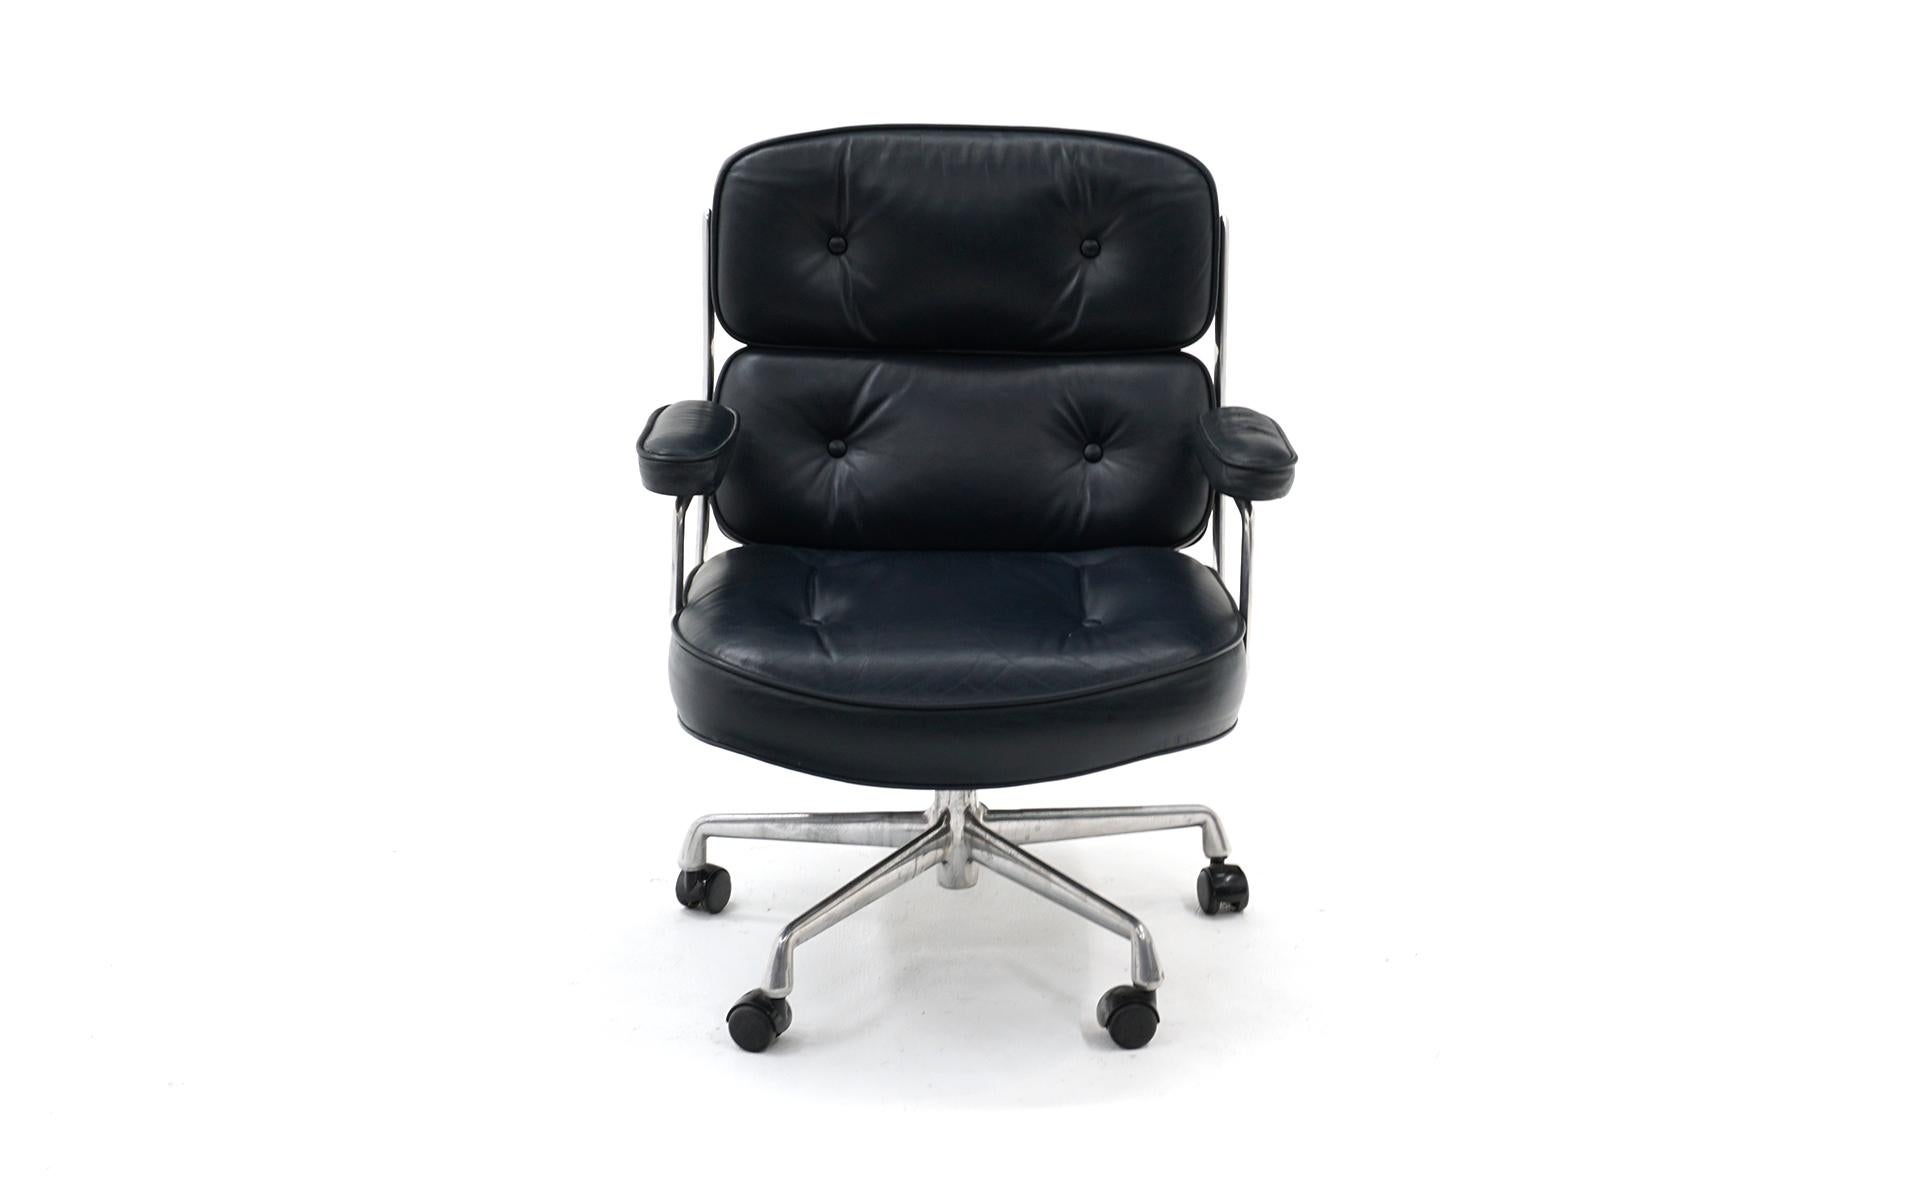 Mid-Century Modern Time Life Executive Desk Chair by Charles and Ray Eames. Dark Gray Blue Leather